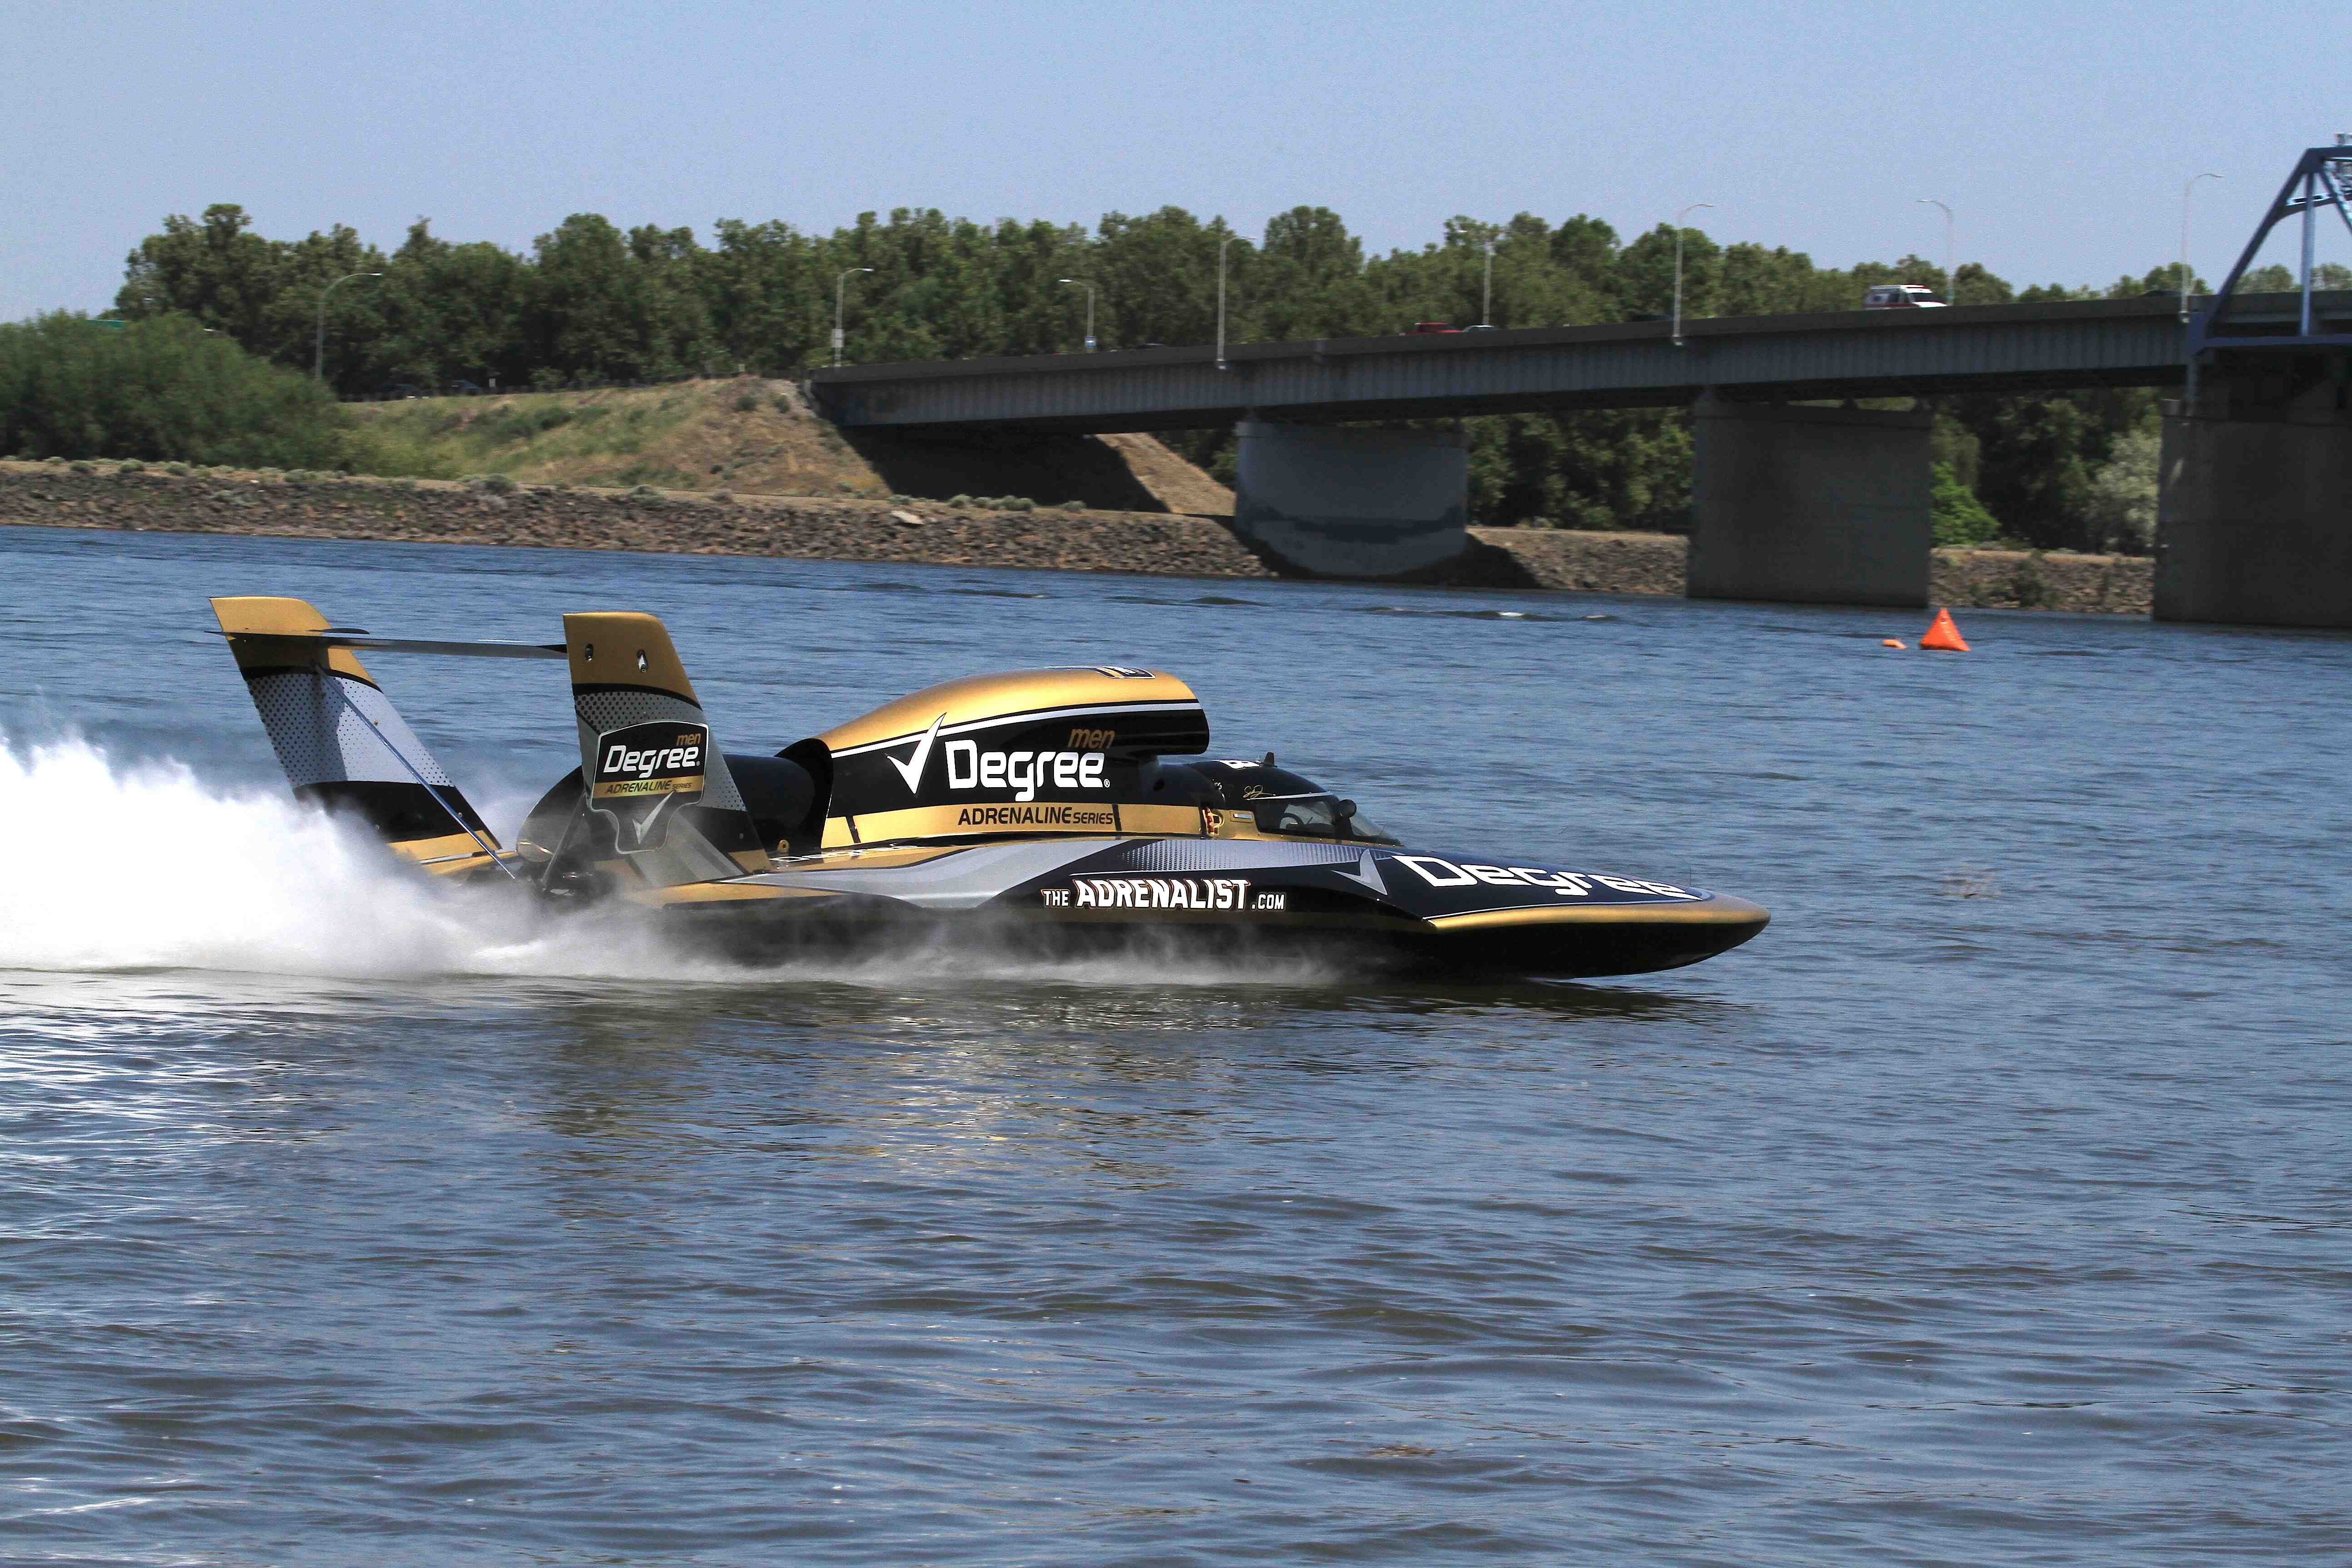 unlimited hydroplane, Race, Racing, Jet, Hydroplane, Boat, Ship, Hot, Rod, Rods, Td Wallpaper